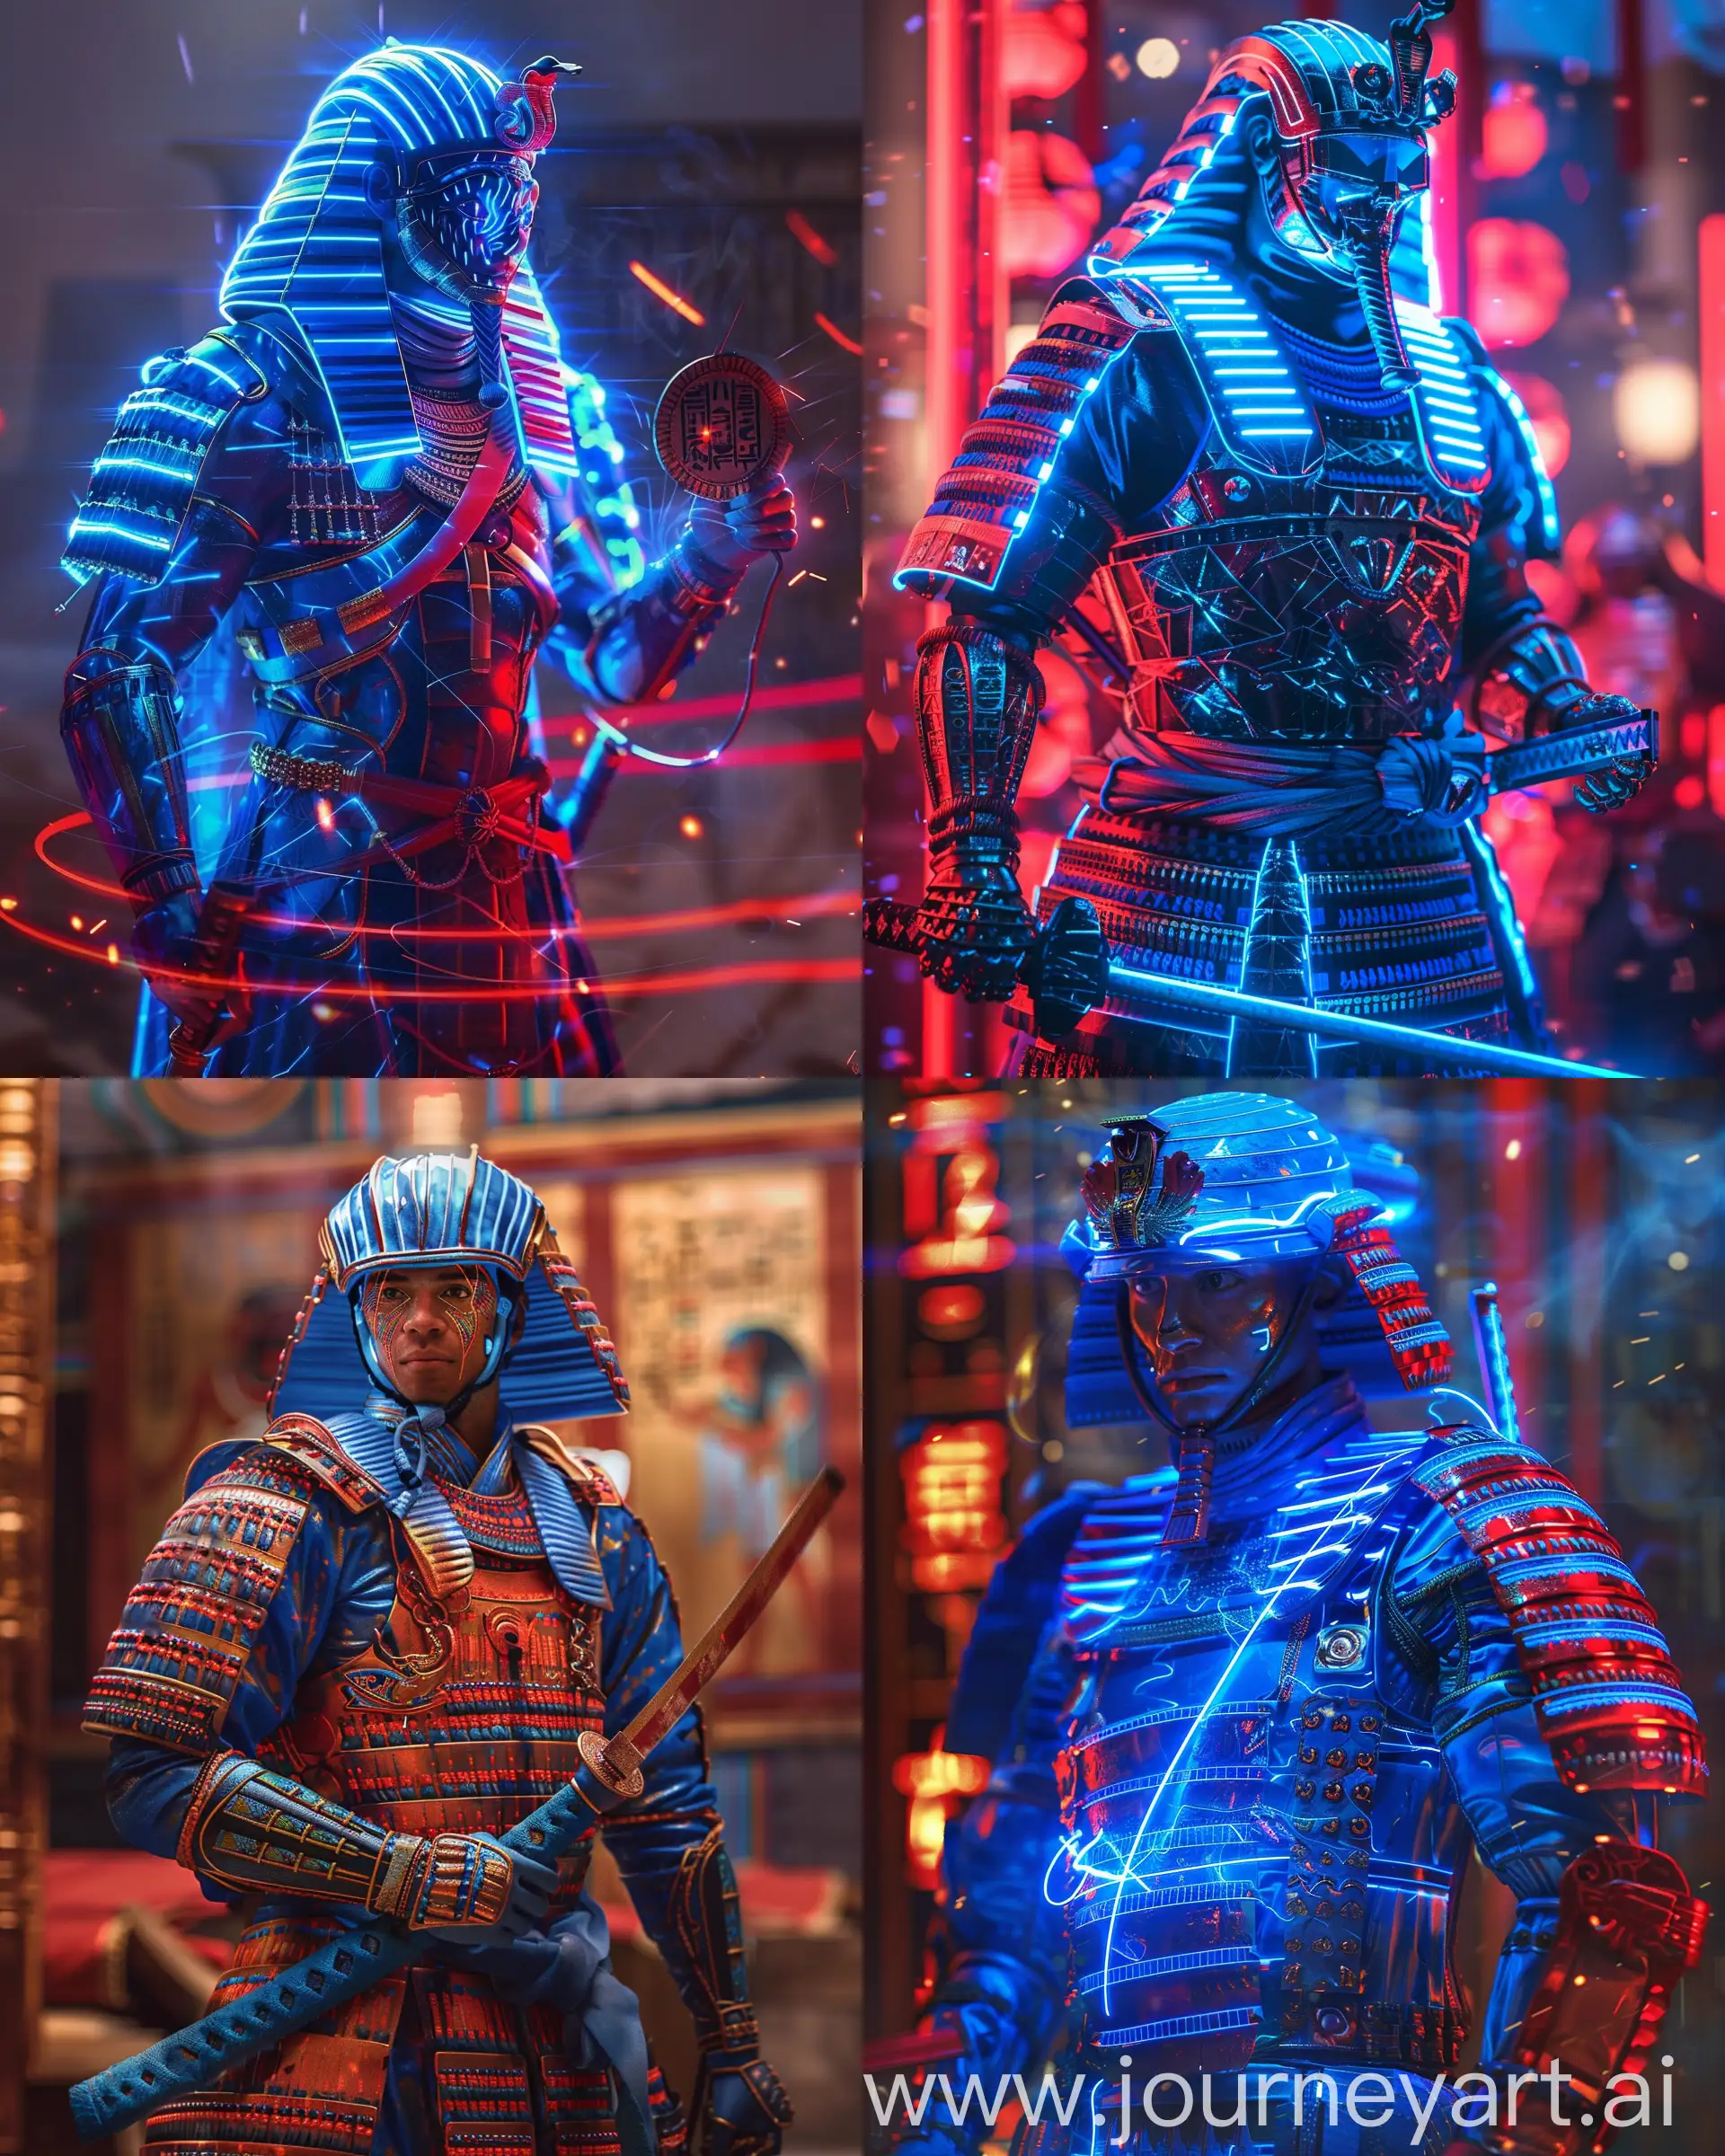 there is a ancient Egyptian man in a blue neon samurai suit holding a sowrd ,Depth of field, powerful male samurai, inspired by Kanō Hōgai, samurai style, dressed in samurai armour, high-tech red armor, wearing techwear and armor, segmented armor and sashimono, very beautiful cyberpunk ancient Egyptian samurai, chinese armor, man in red armor, japanese warrior, wearing japanese techwear --v 6.0 --ar 4:5